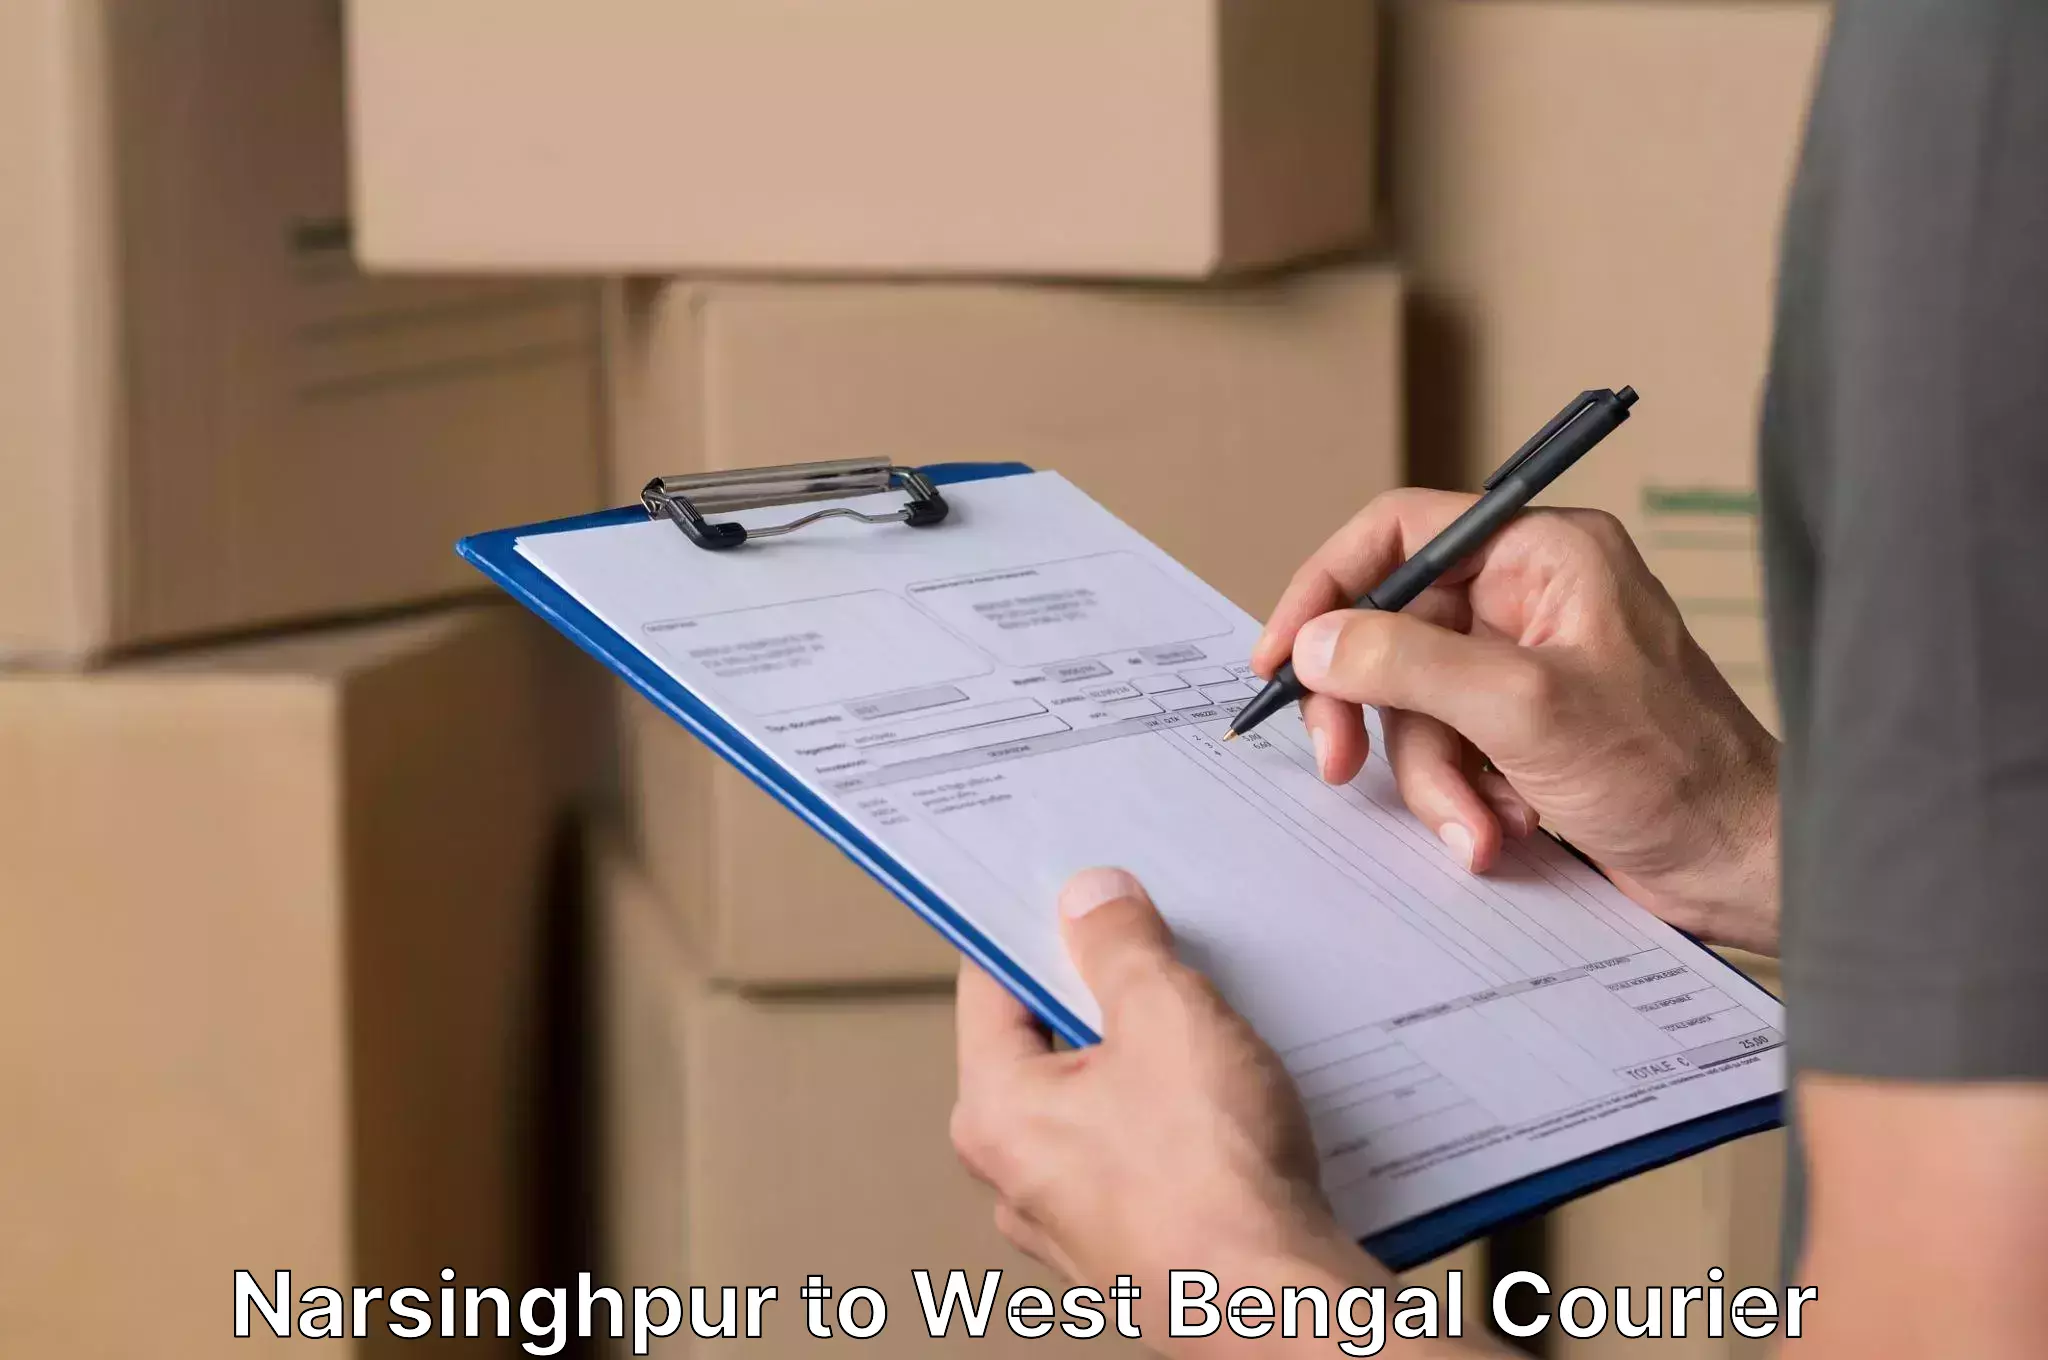 Furniture relocation experts Narsinghpur to West Bengal